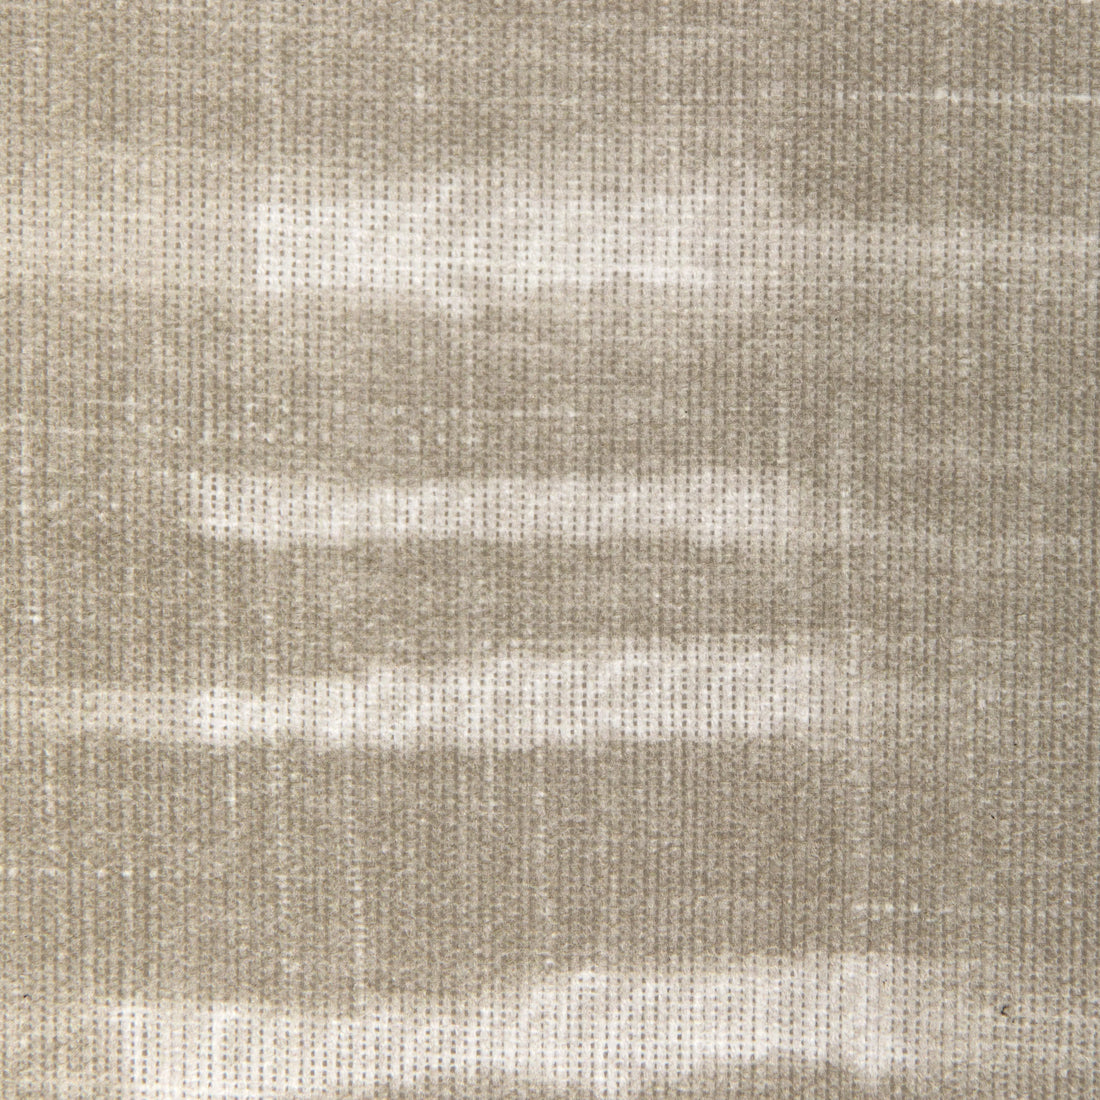 Closeup view of Lattimer fabric in driftwood color - pattern LATTIMER.16.0 - by Kravet Couture in the Riviera collection